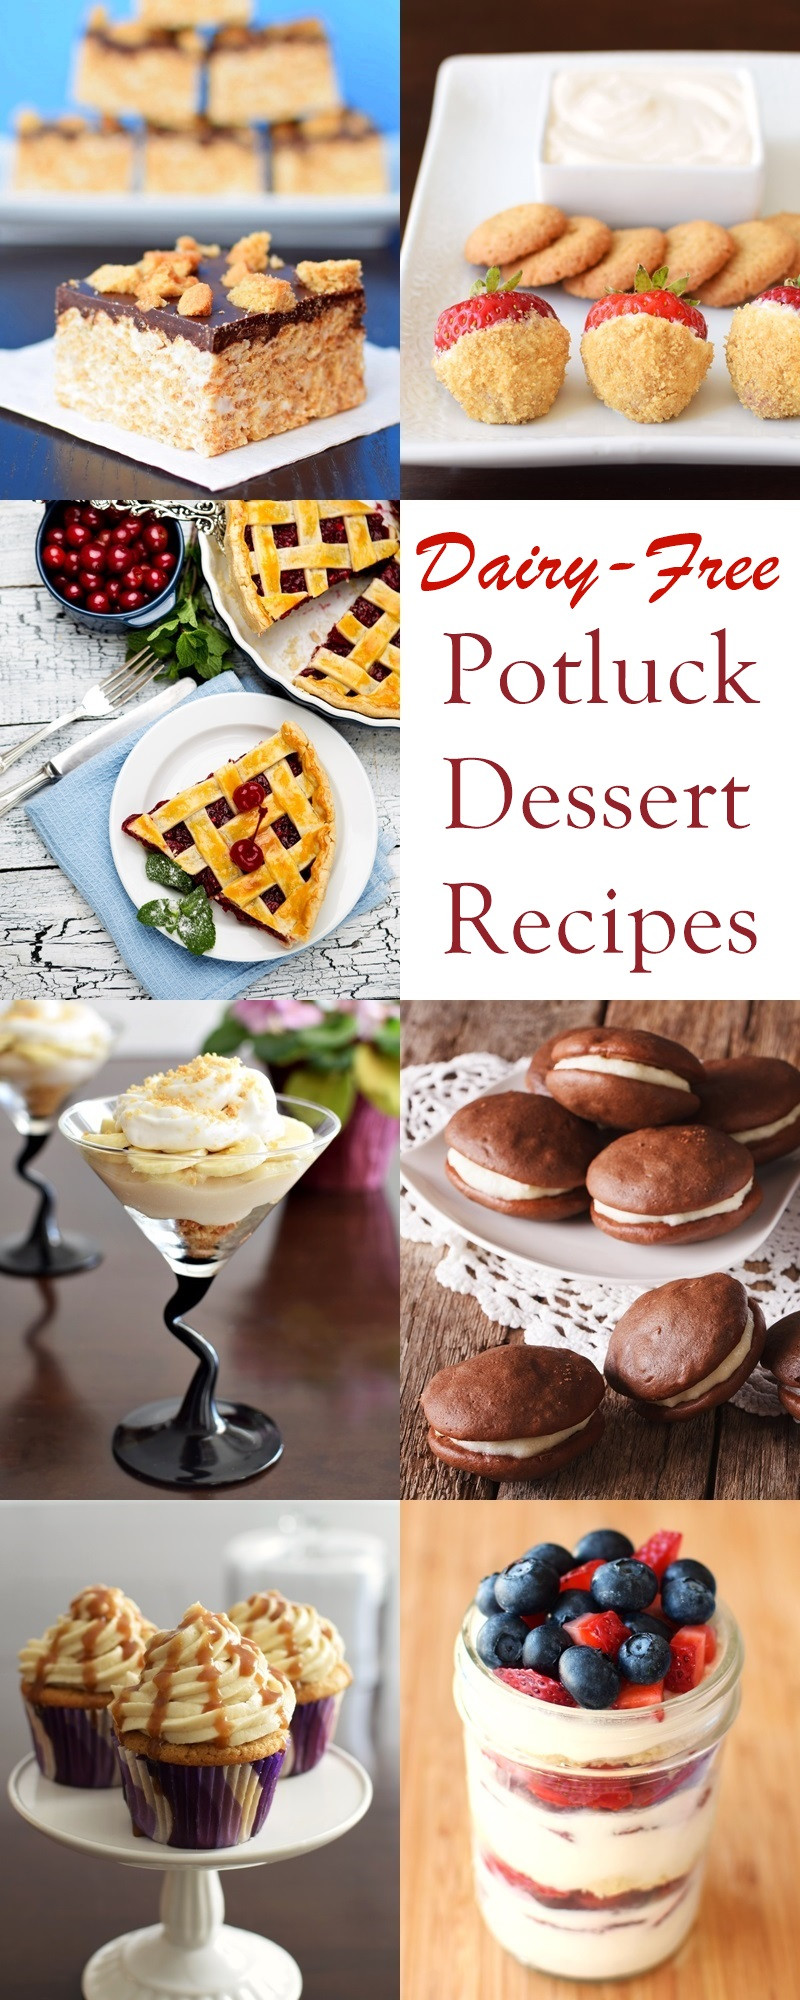 Soy And Dairy Free Recipes
 22 Dairy Free Potluck Dessert Recipes Everyone Will Love